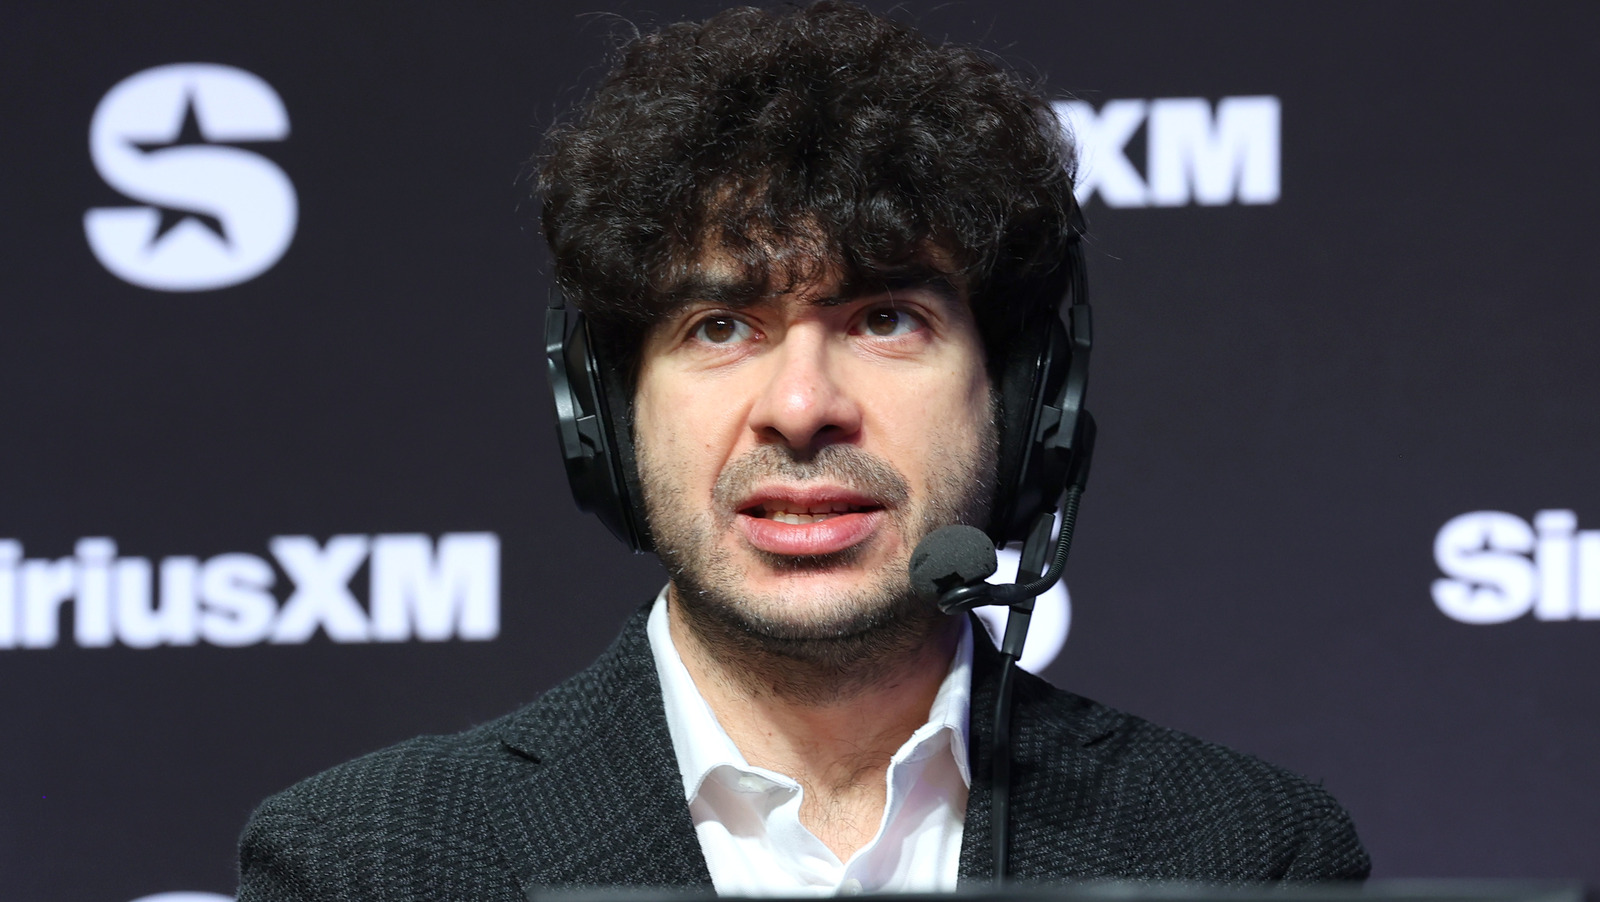 Tony Khan Discusses The Future Of AEW's Media Rights